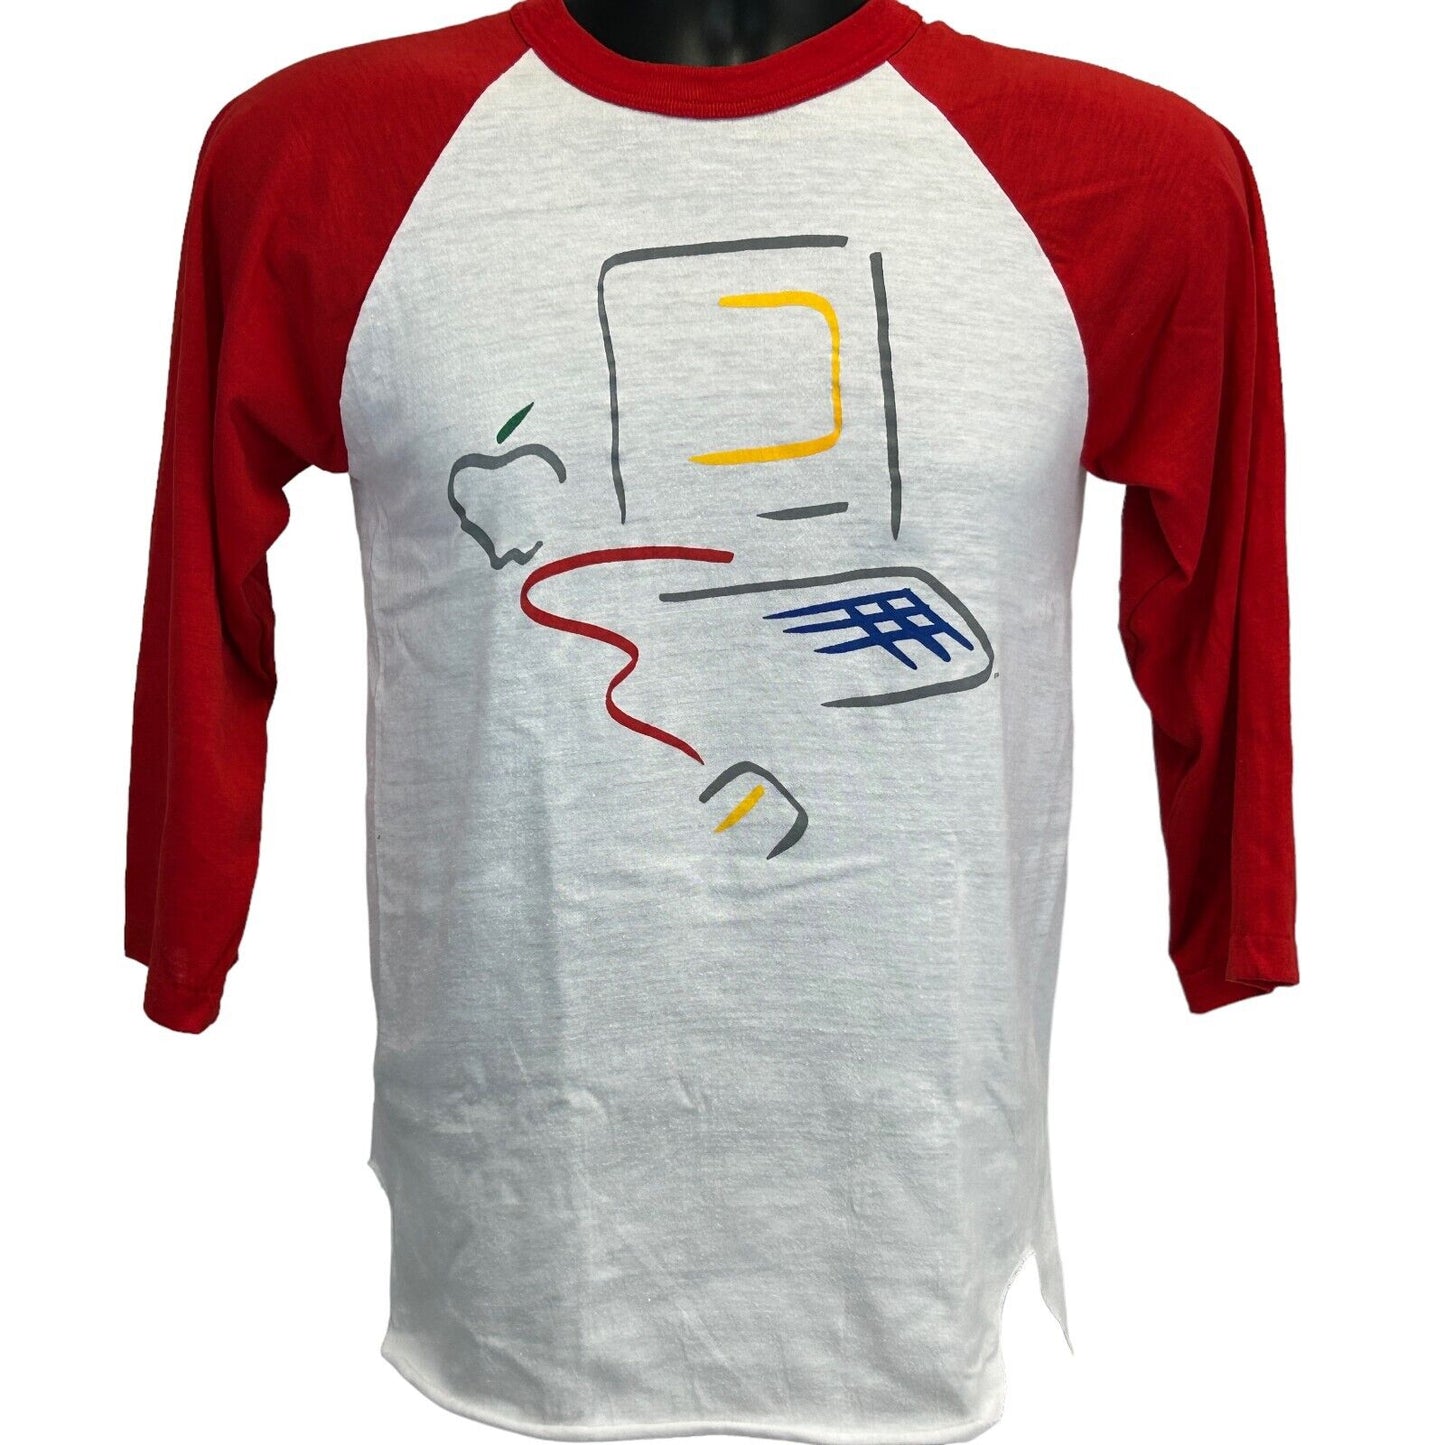 Apple Computers Vintage 80s T Shirt XS Picasso Macintosh 128K Made In USA Raglan